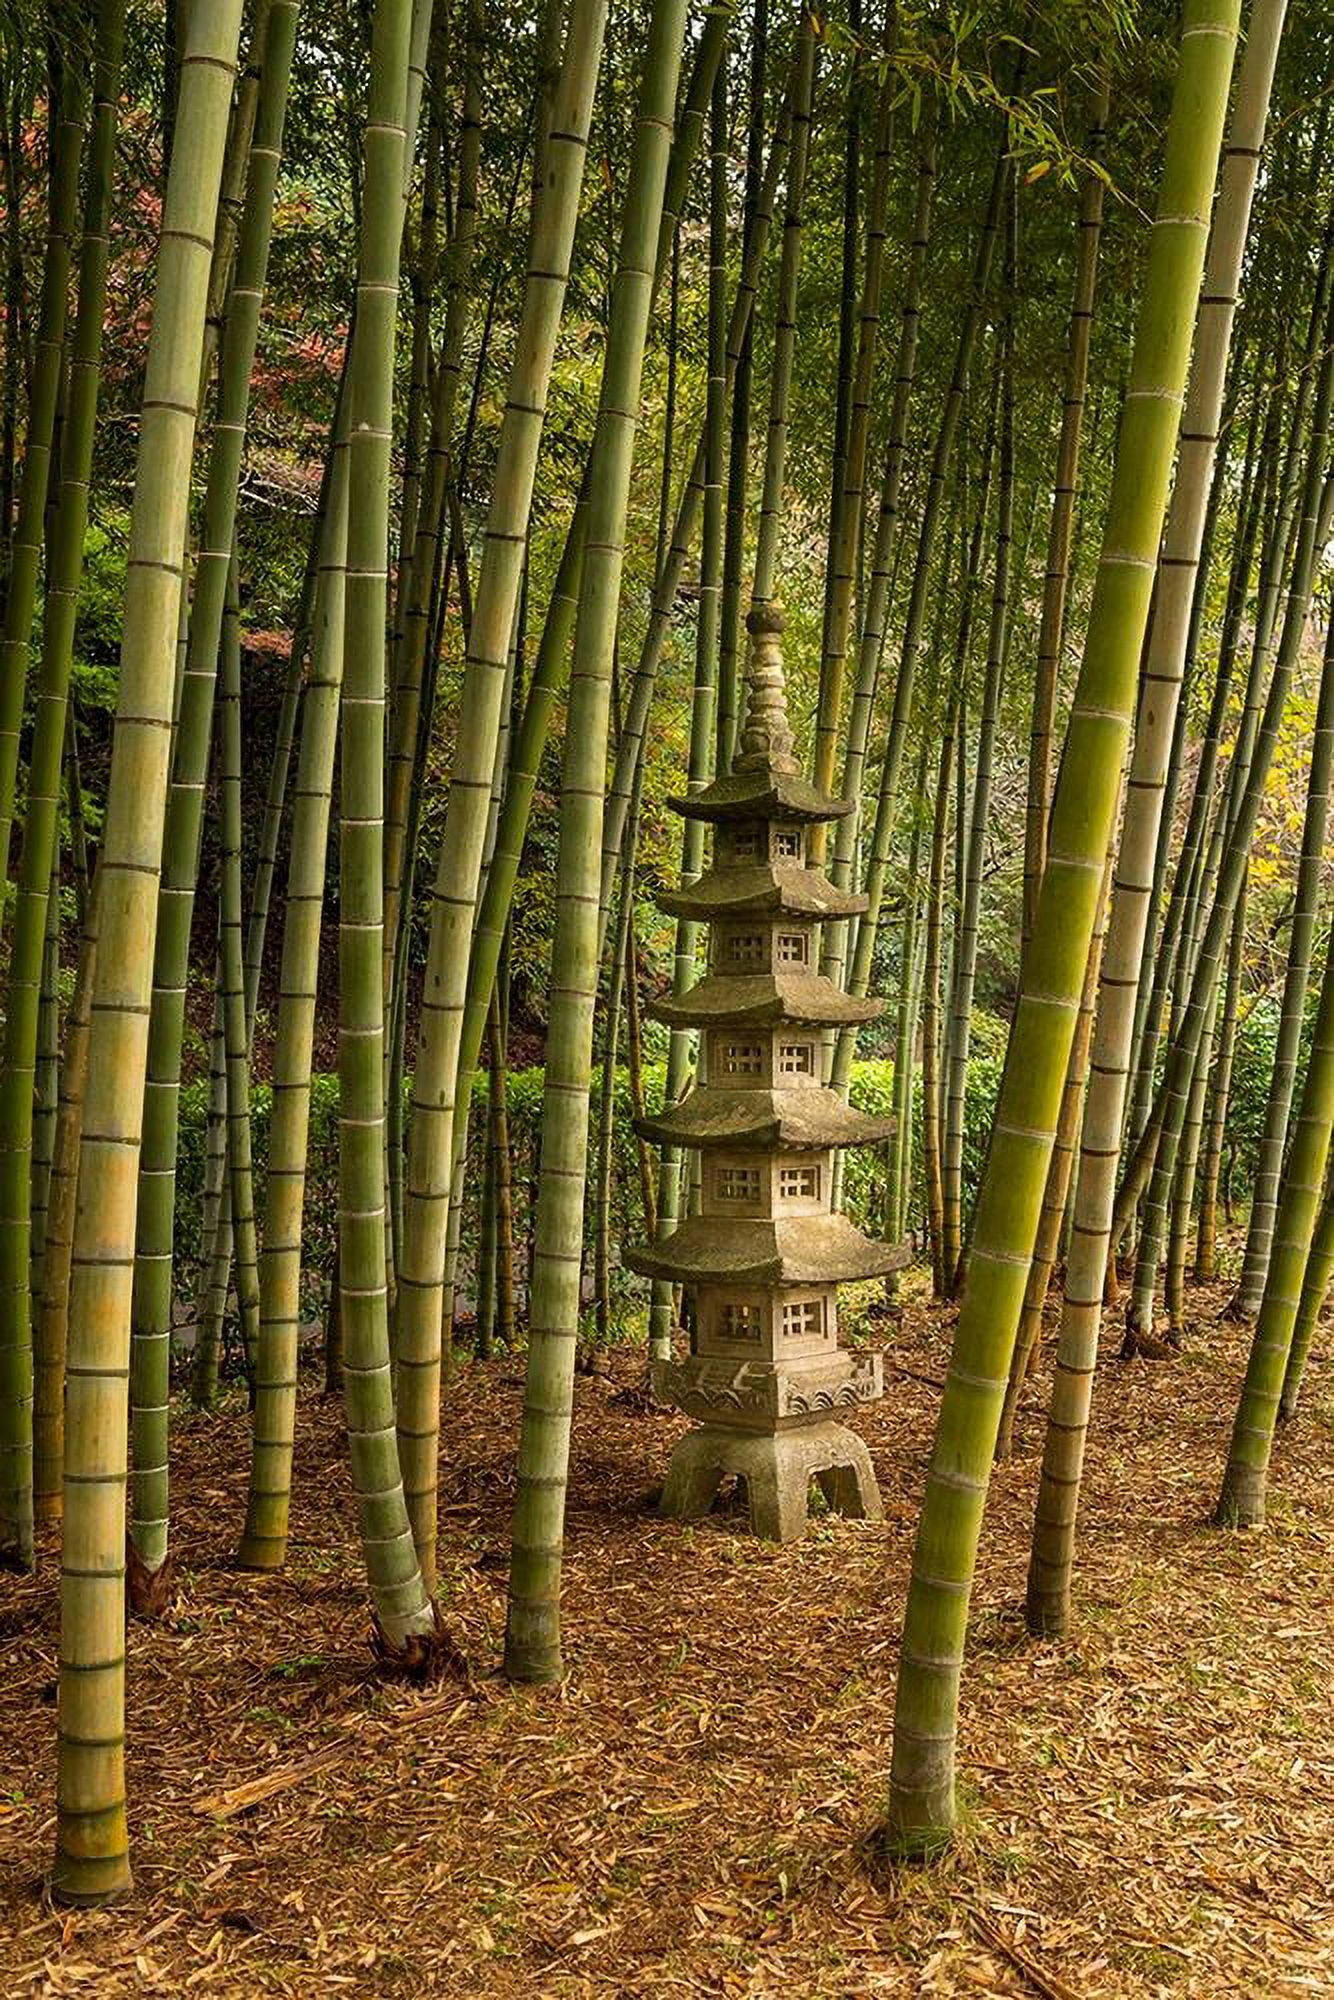 A tall pagoda statue in the center of a tall bamboo grove-Akebonoyama Park-Japan by Sheila Haddad (24 x 36) - image 1 of 1